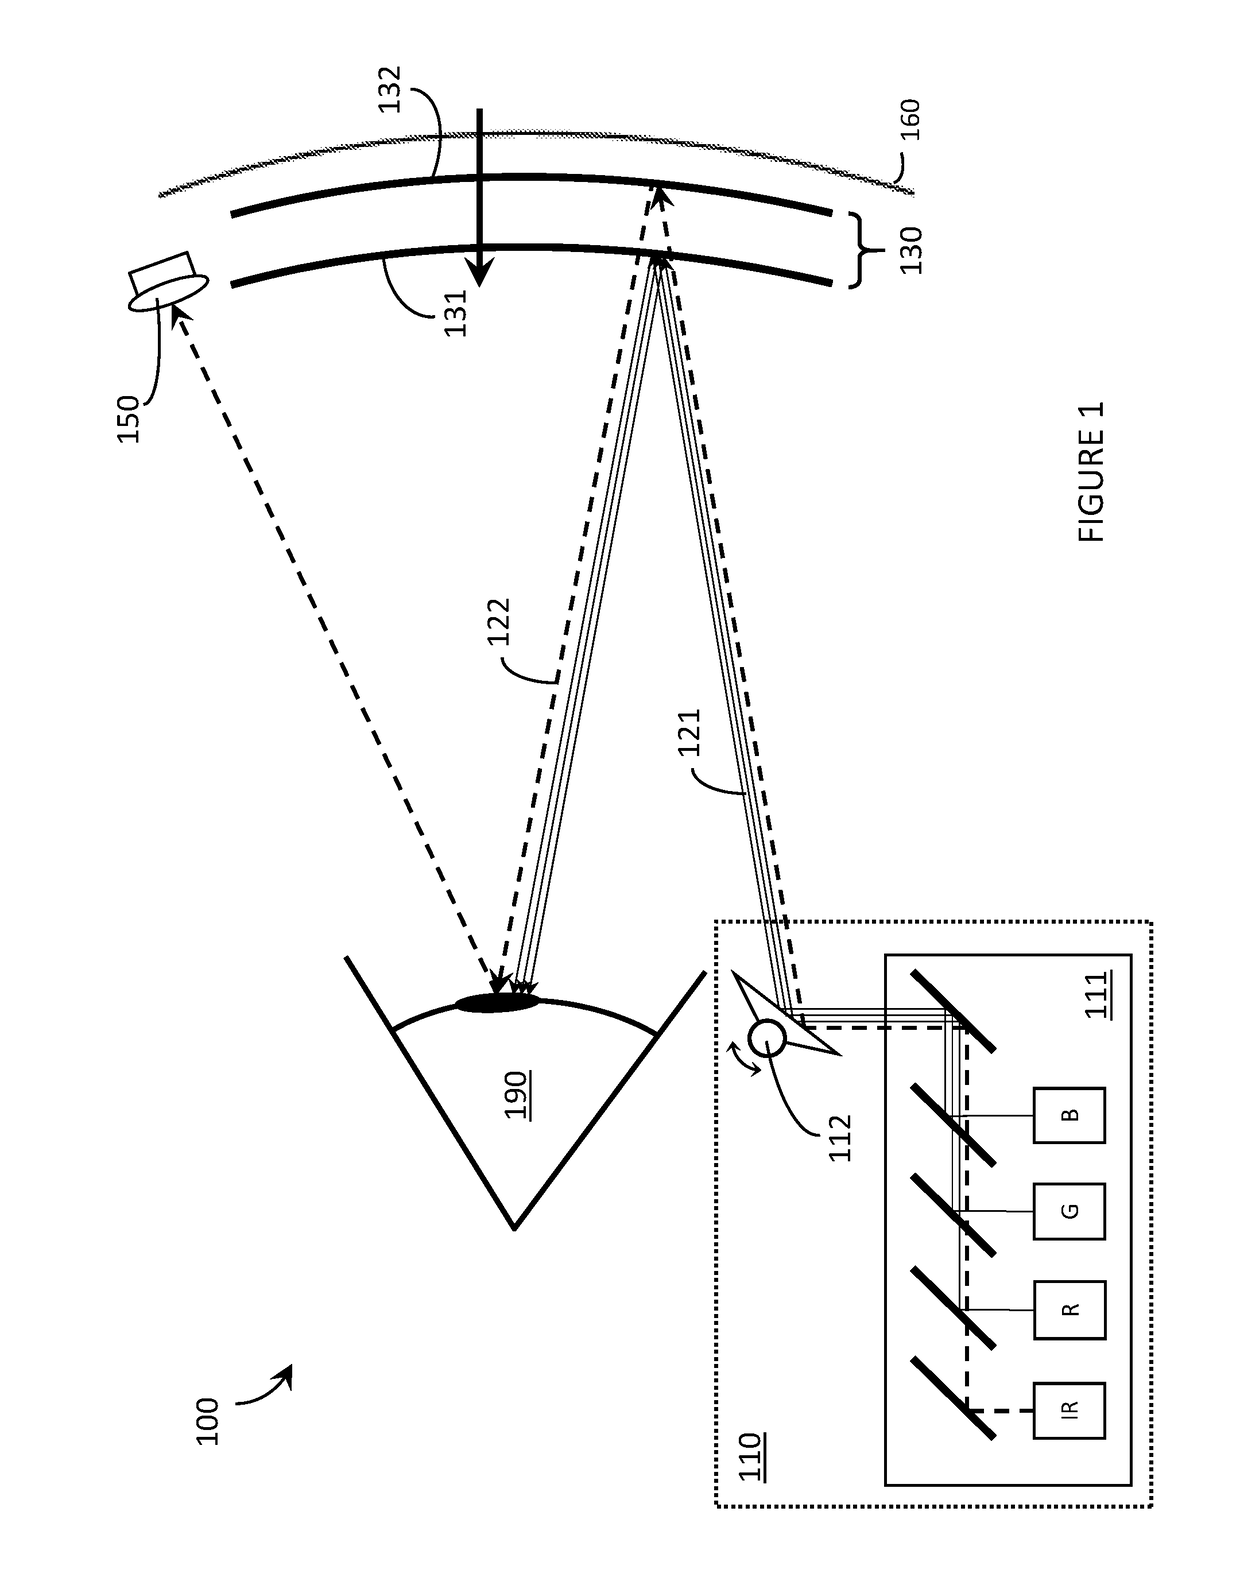 Dynamic calibration systems and methods for wearable heads-up displays